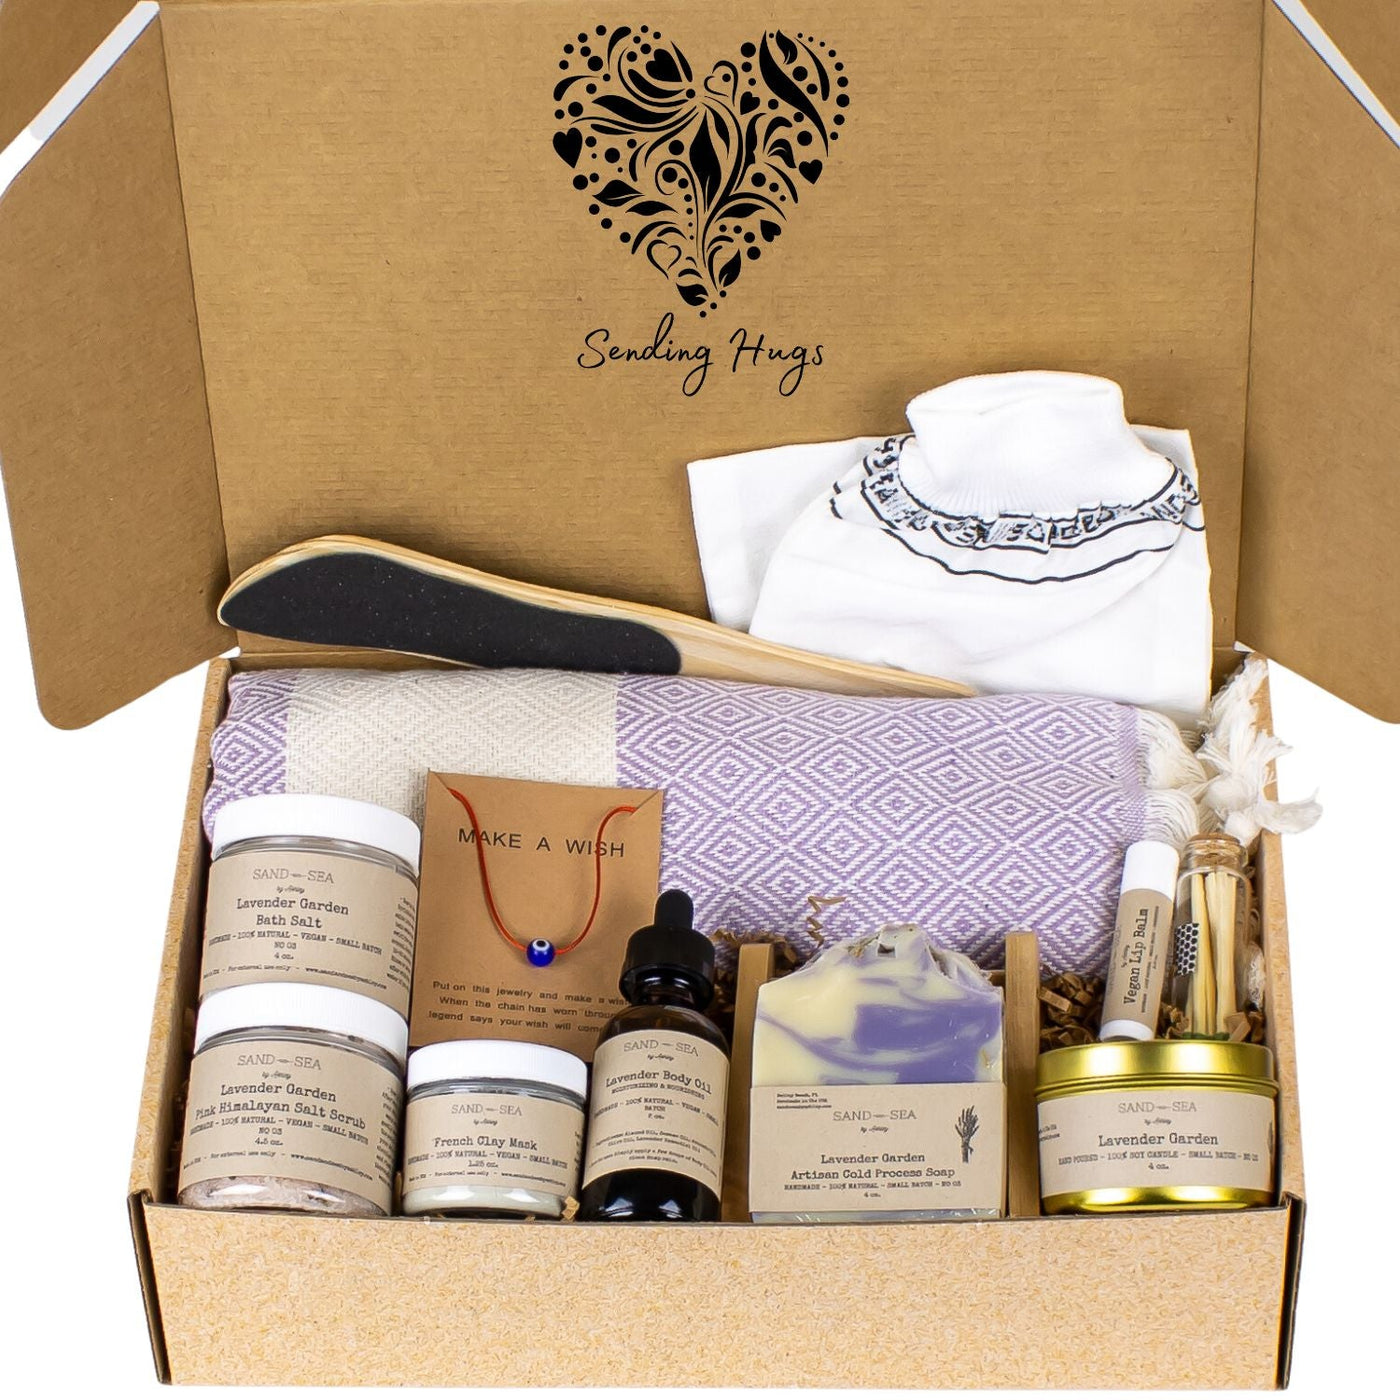 Sending Hugs Lavender Spa Gift Set for Women - Self Care Gift Box with Turkish Beach Towel 13 pieces - Sand & Sea by Ashley